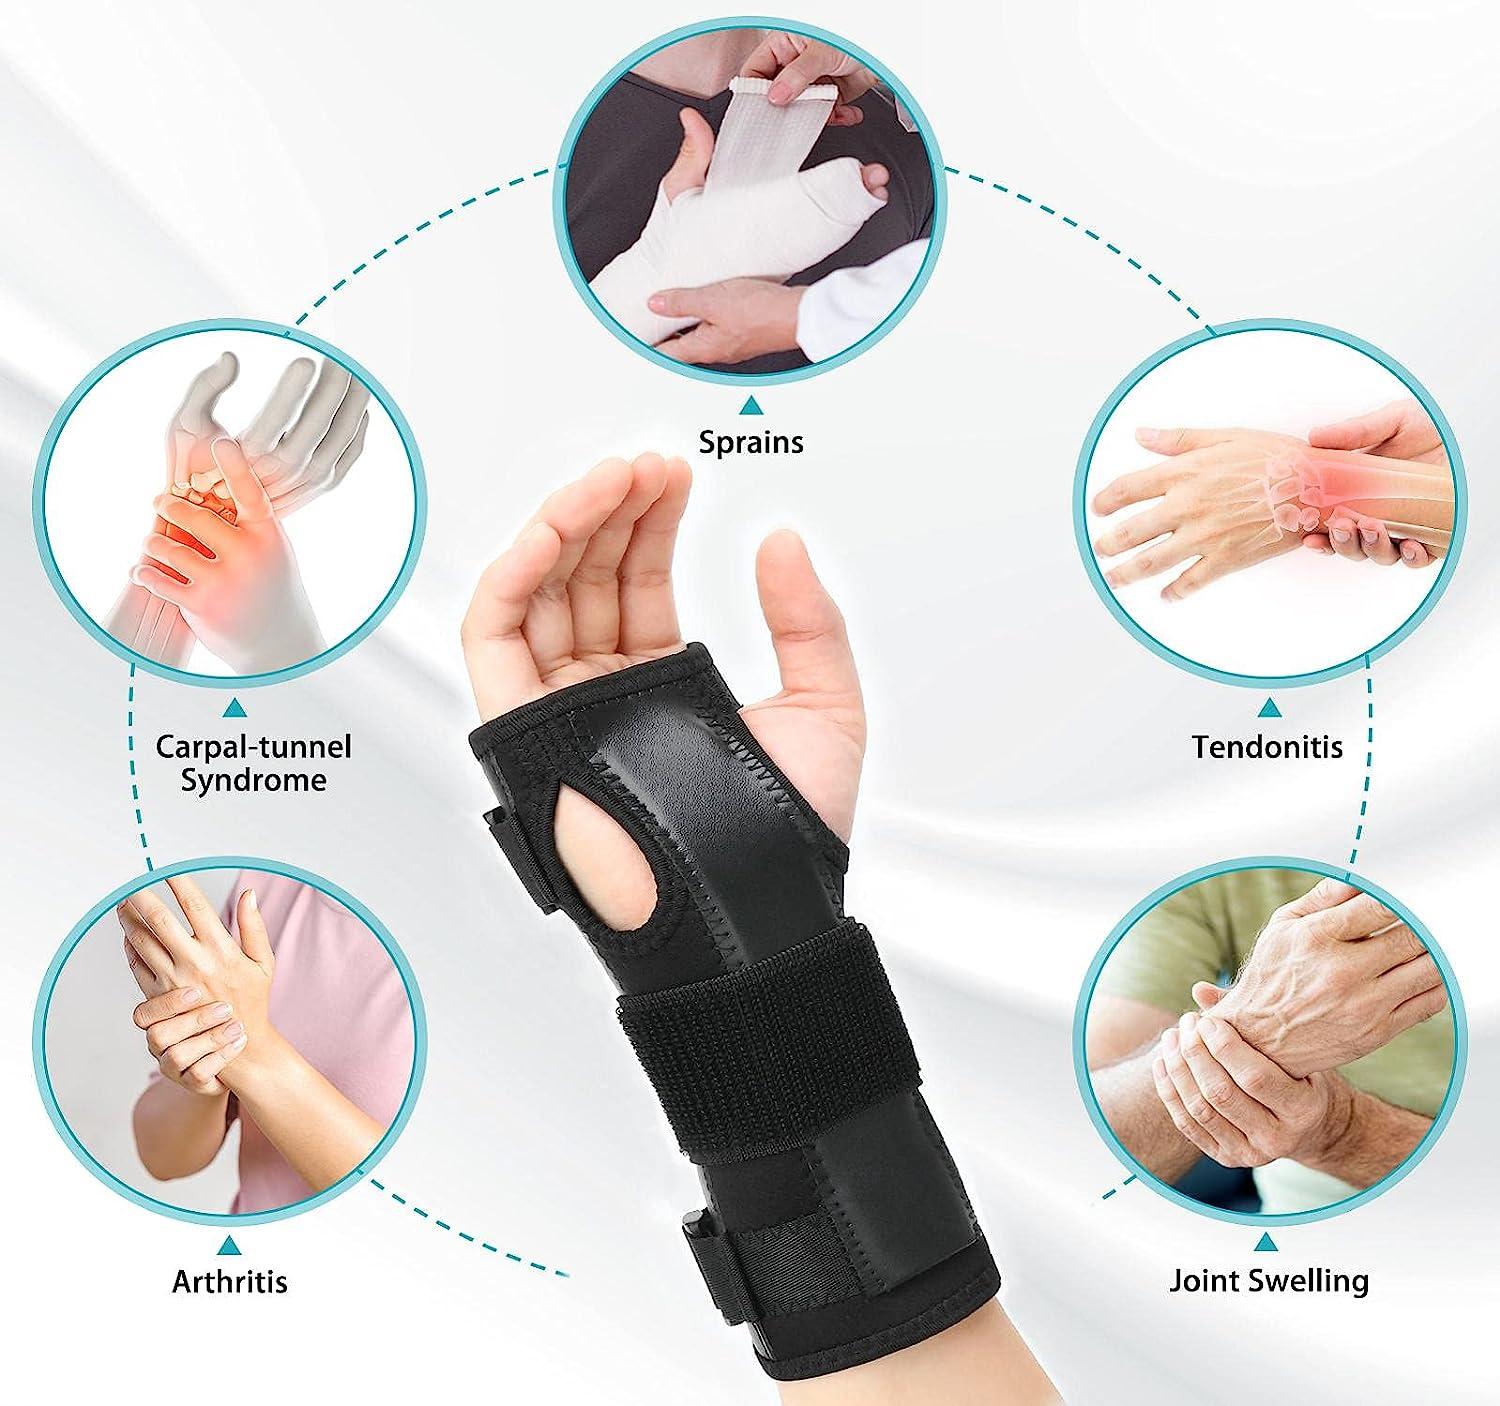 PKSTONE Wrist Splint for Carpal-Tunnel Syndrome, Adjustable Compression Wrist  Brace for Right and Left Hand, Pain Relief for Arthritis, Tendonitis,  Sprains L/XL (1pic)